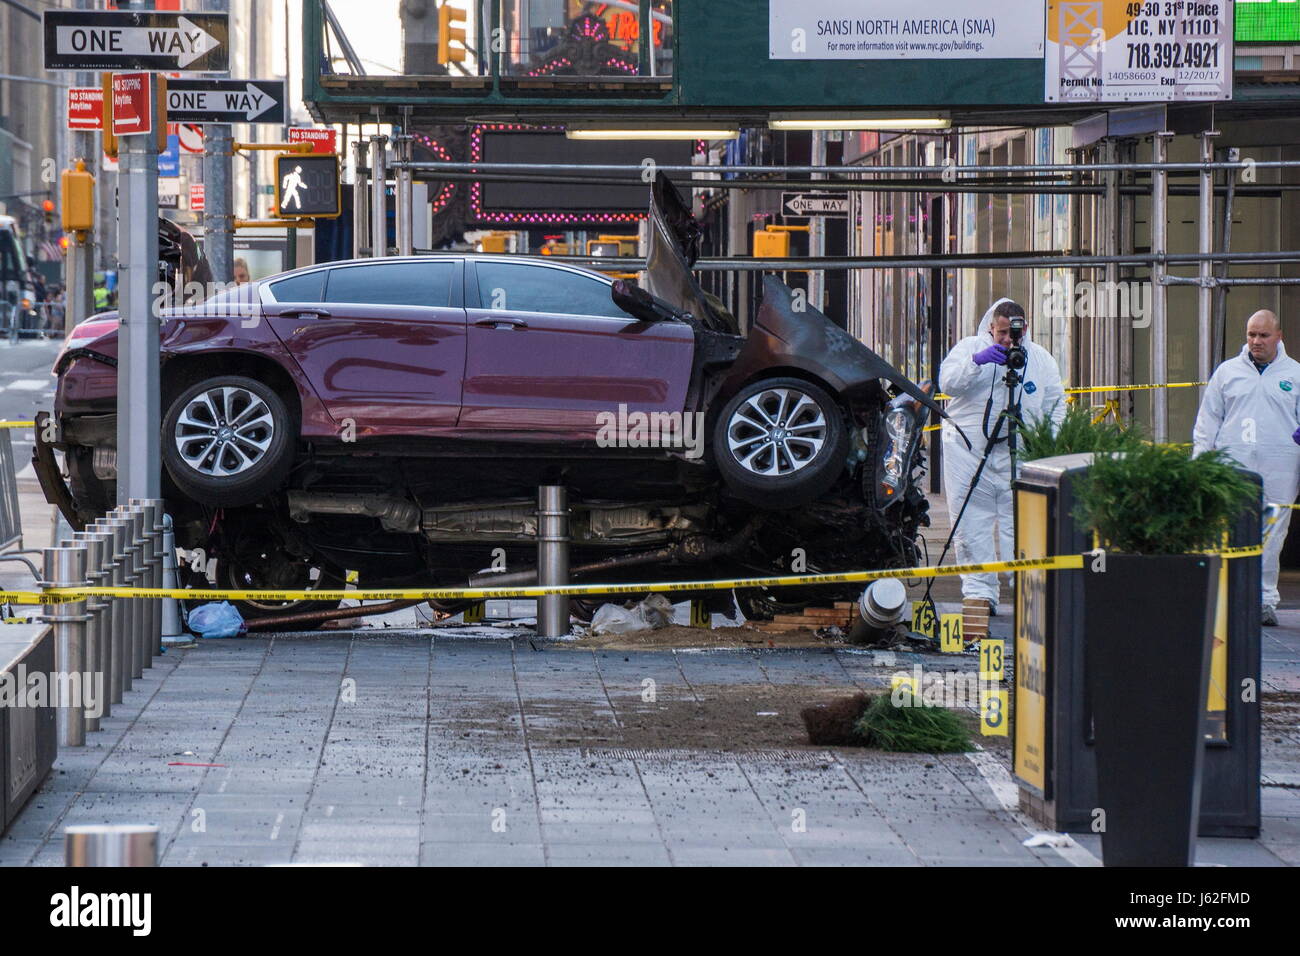 New York, New York, USA. 18th May, 2017. Emergency workers investigate the scene of a car crash in Times Square that took the life of an 18 year-old Michigan girl and injured 22 others. Credit: Kevin C. Downs/ZUMA Wire/ZUMAPRESS.com/Alamy Live News Stock Photo